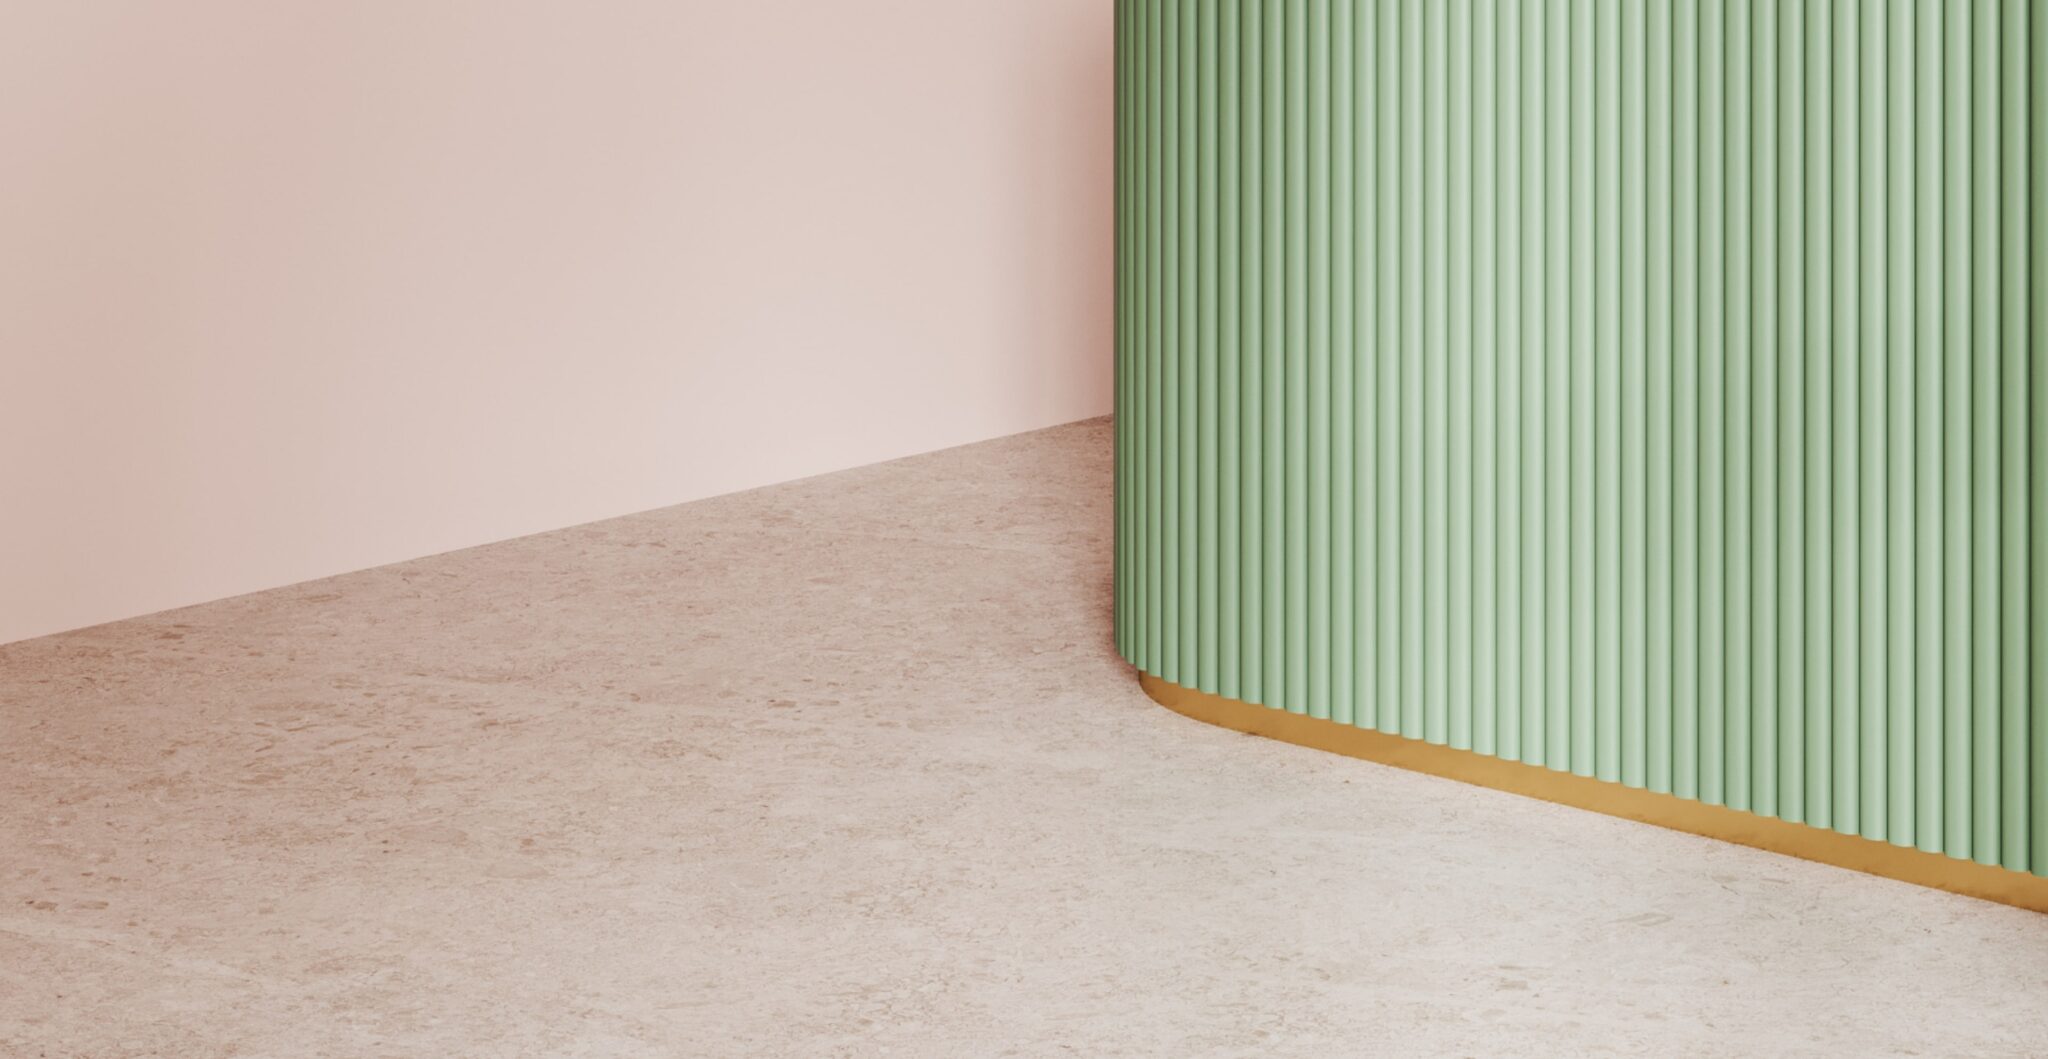 A vibrant green wall with a shiny gold trim and a playful pink floor.